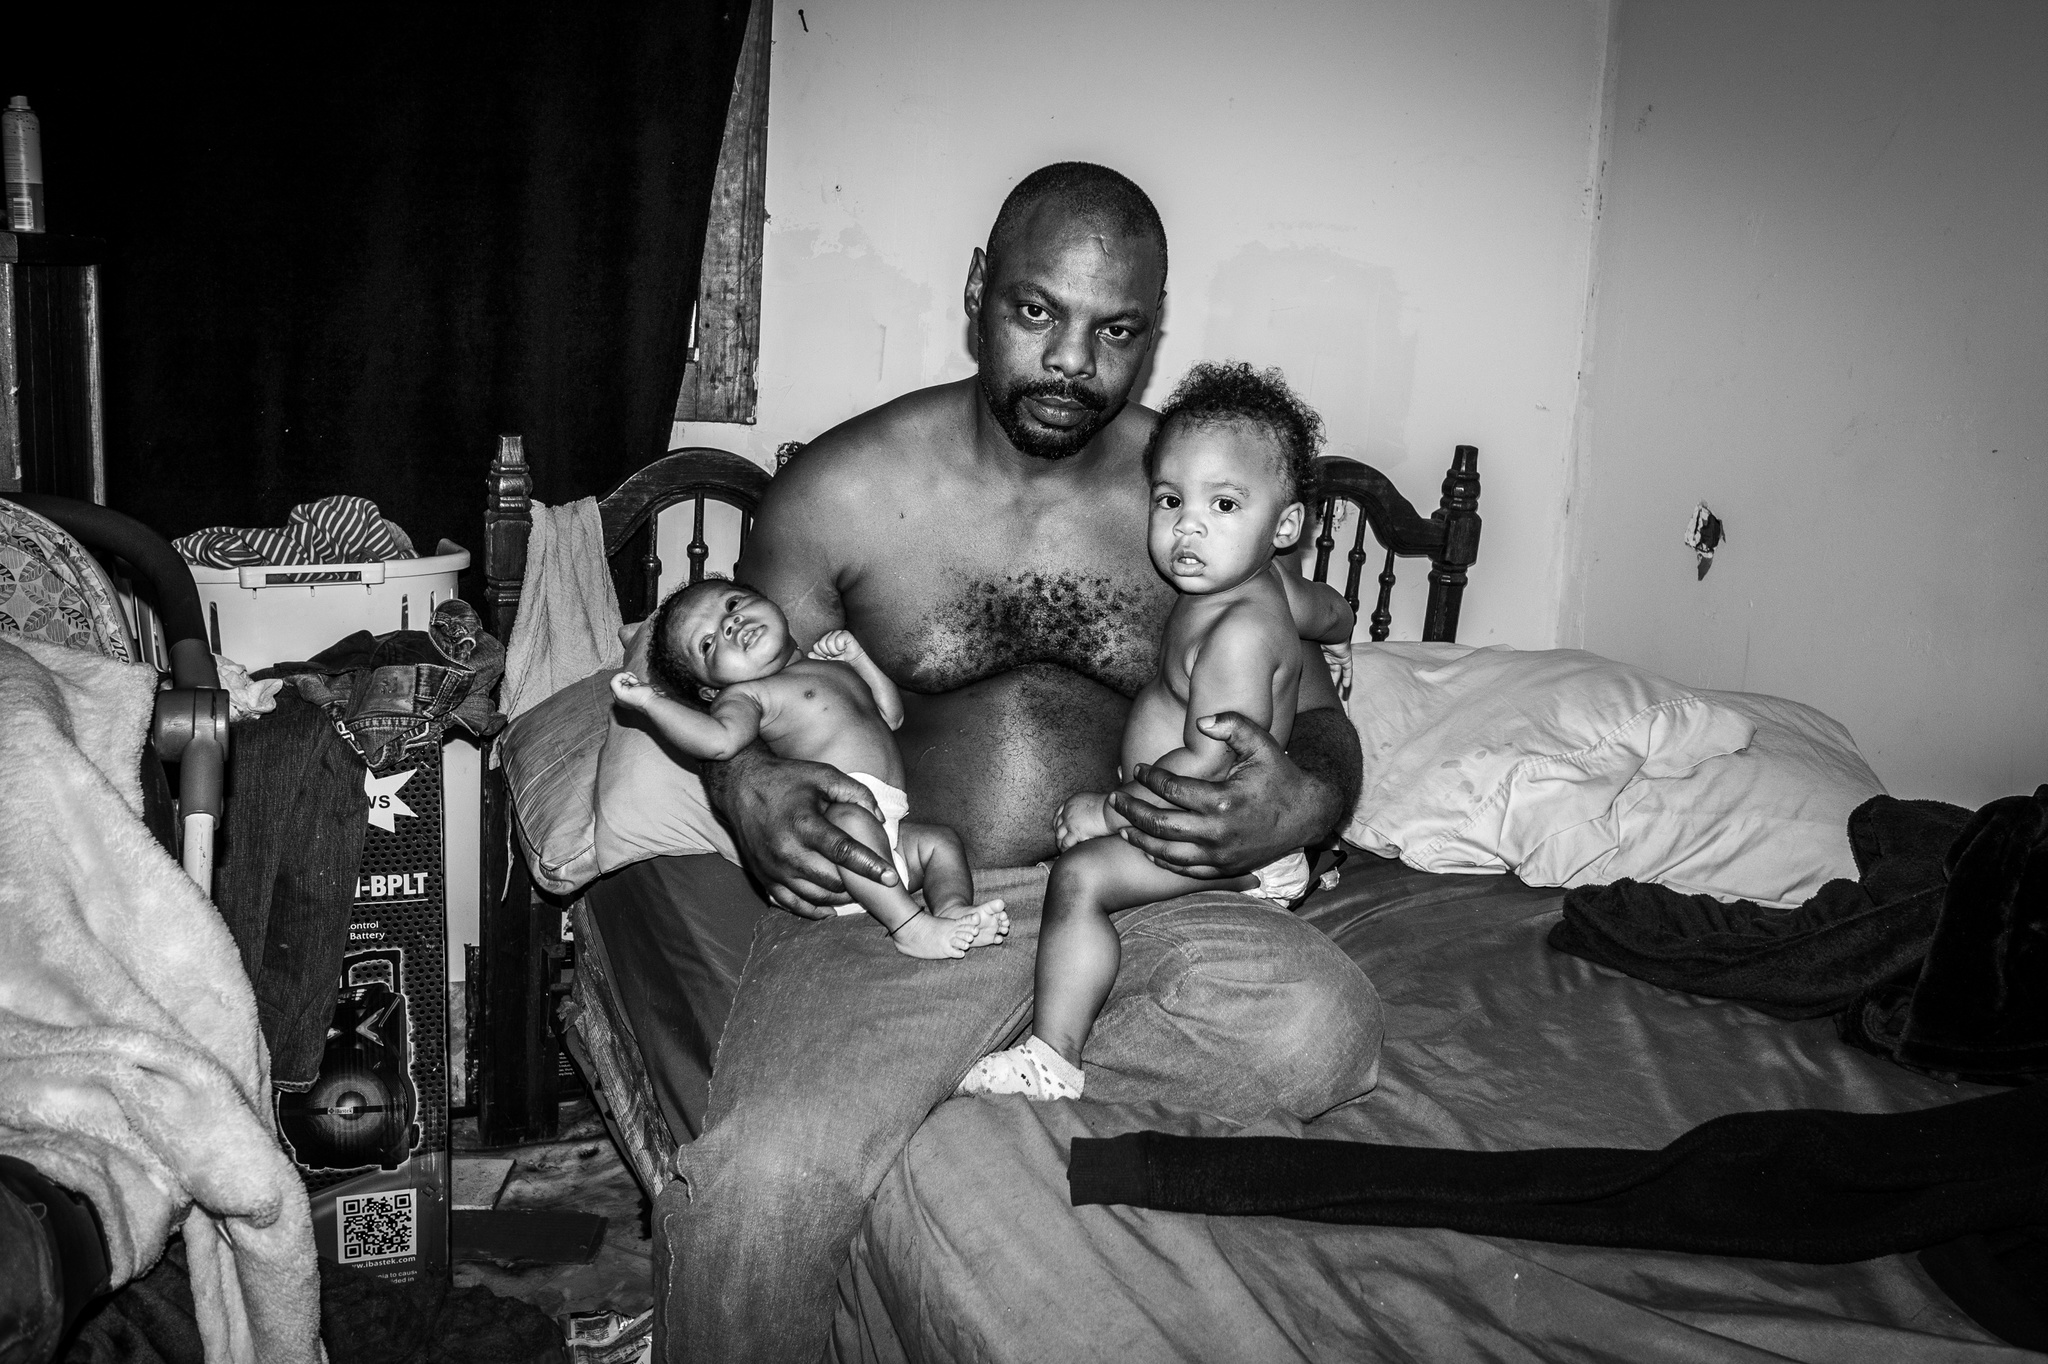 Chadley Johnson, aka "Cut Up," at home with his two children, Chad Love and Chastity. Scotlandville, Baton Rouge, Louisiana. December 2020.